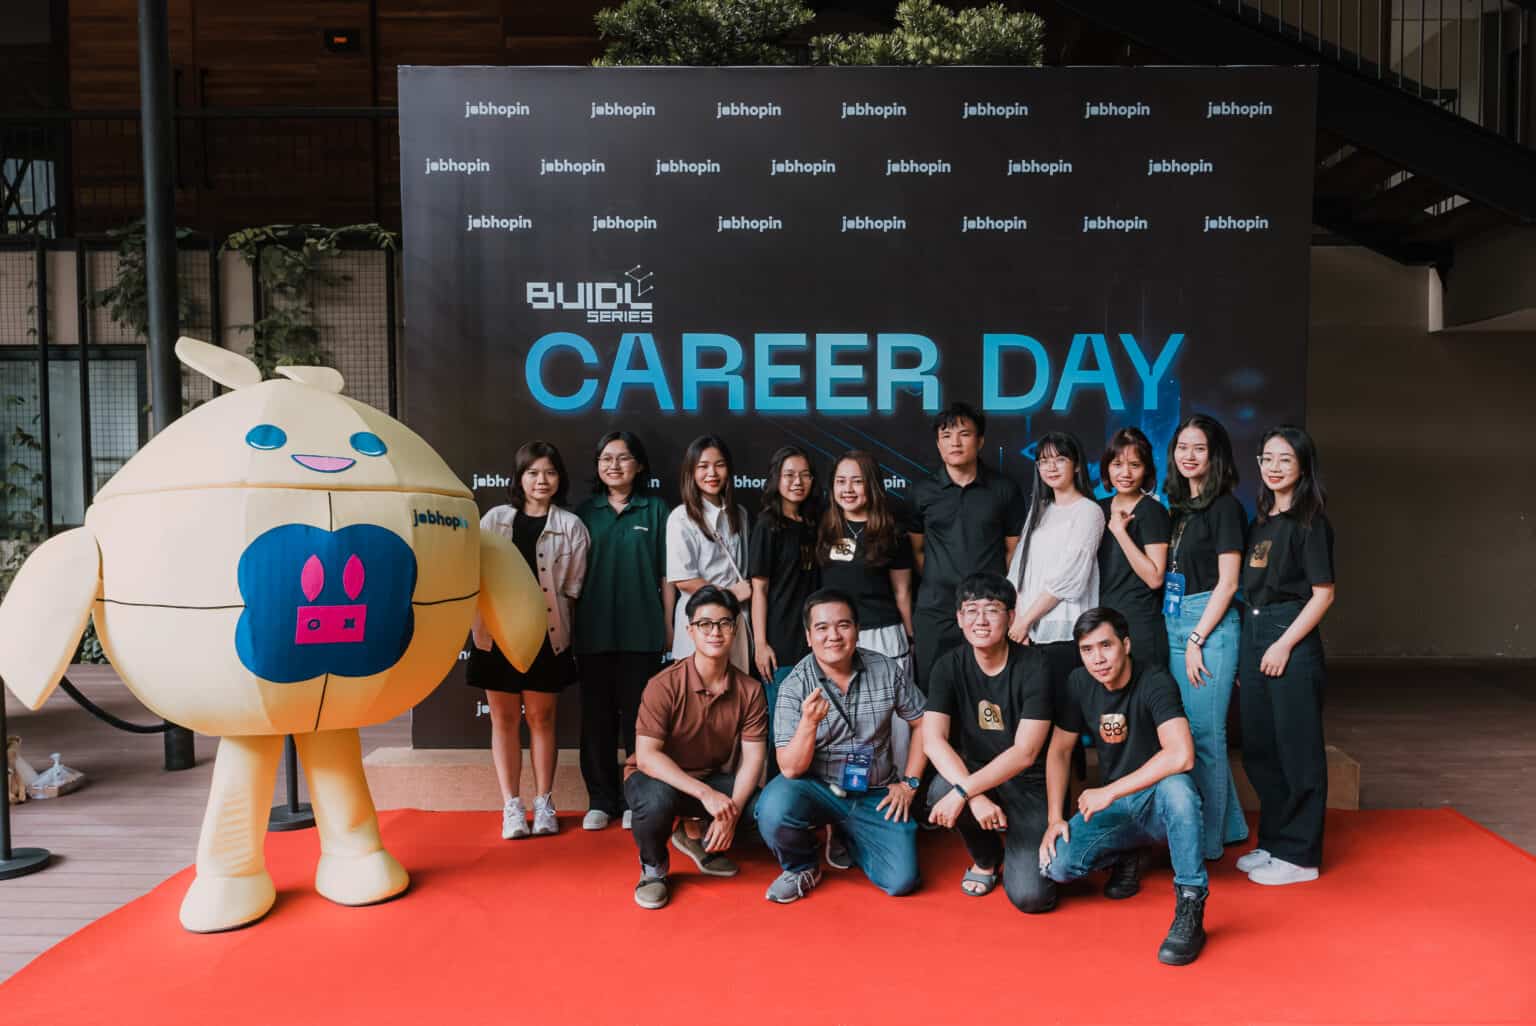 chup-hinh-cung-cac-thanh-vien-của-buidl-career-day